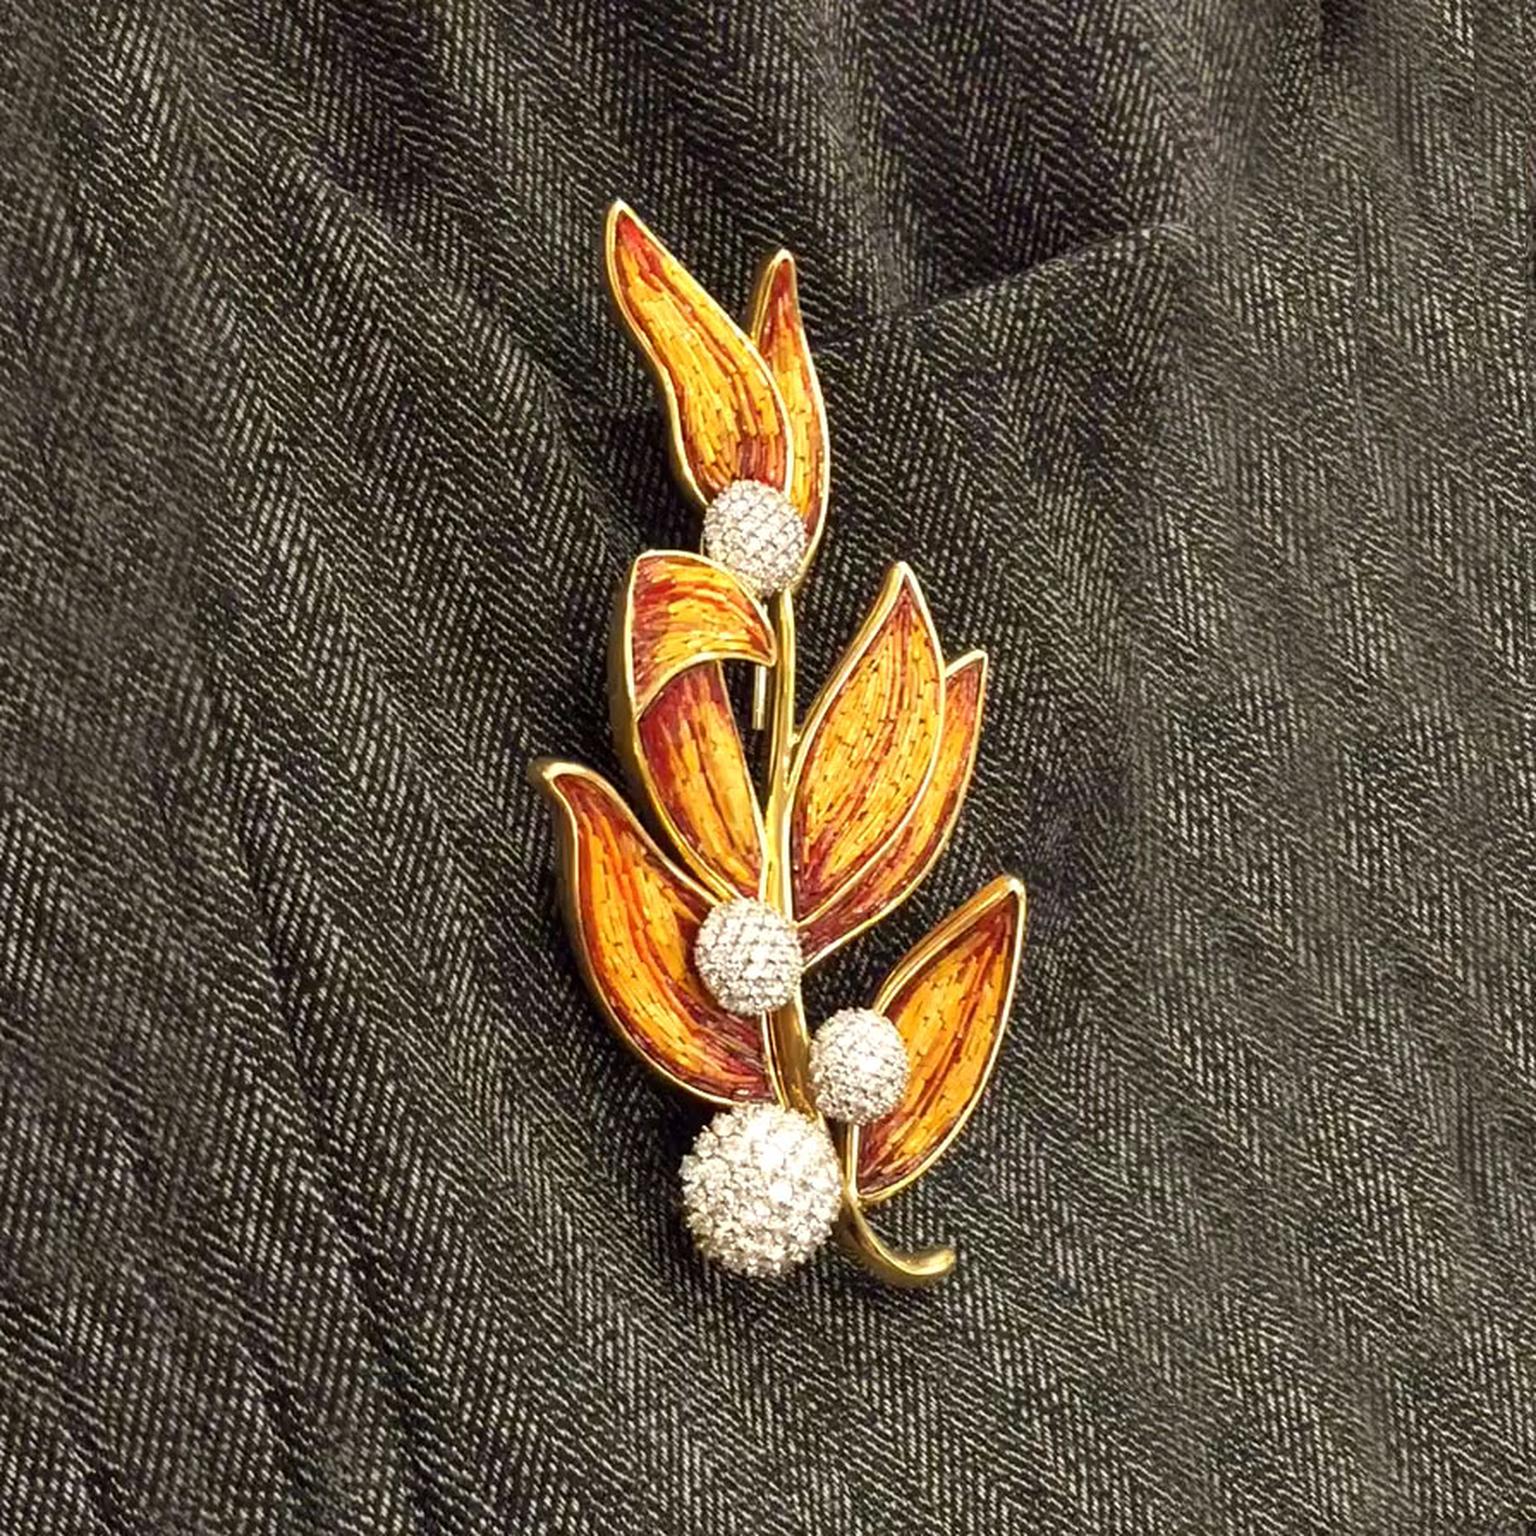 Brooches for a quick style update